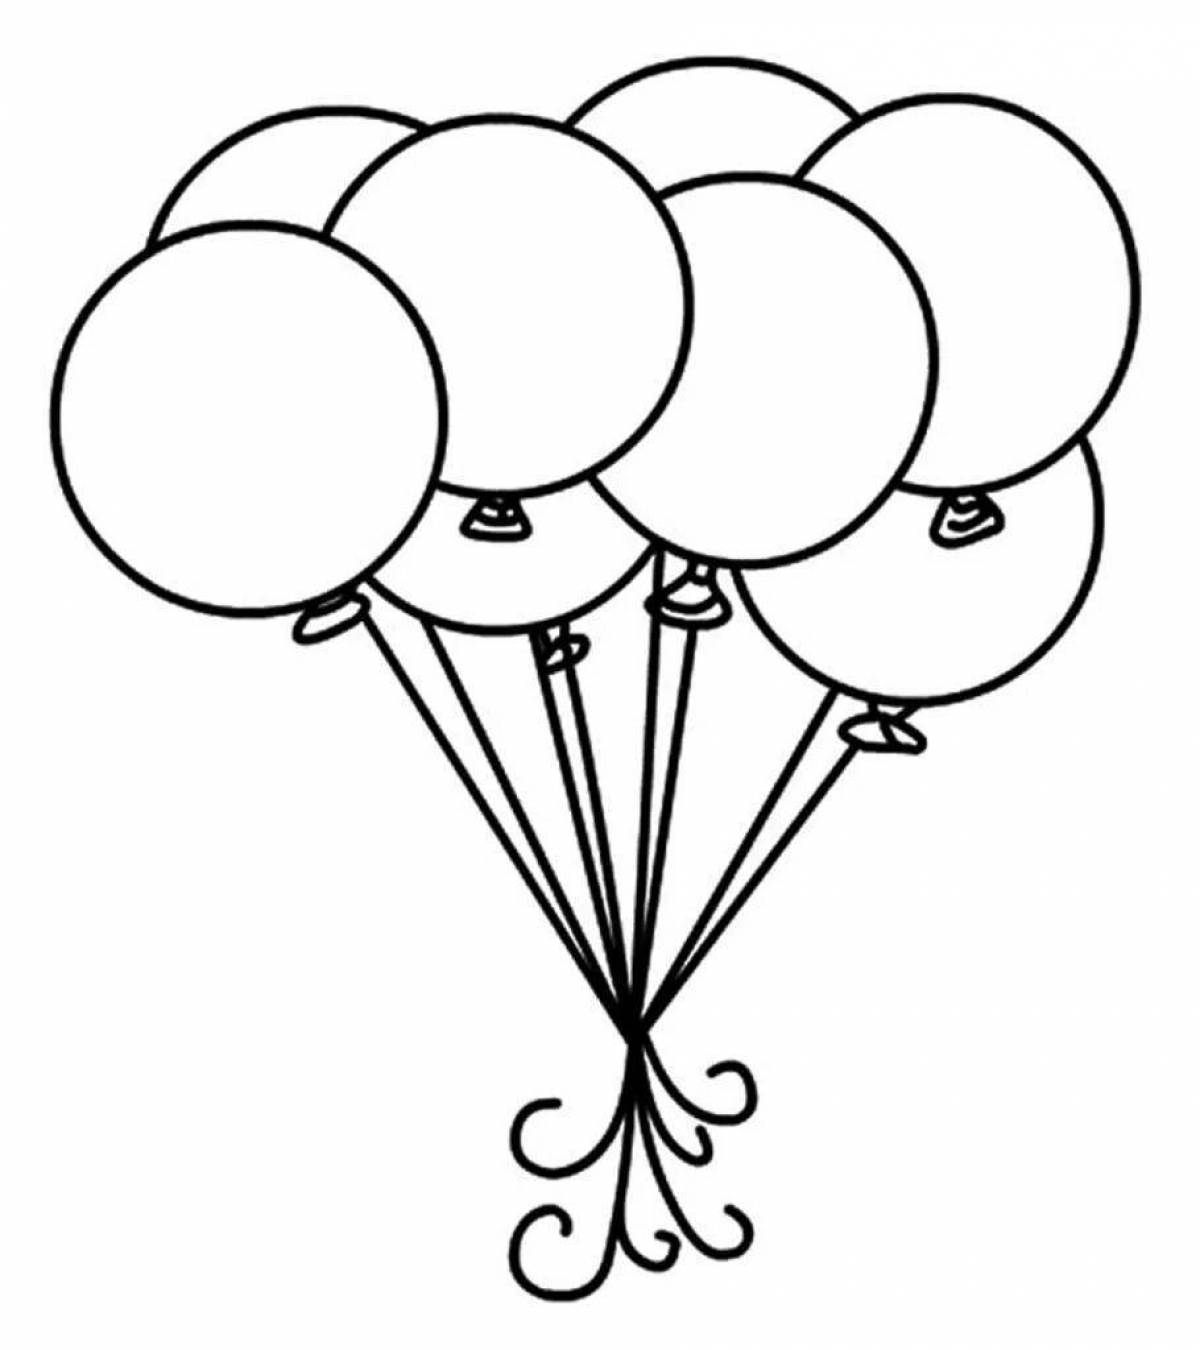 Amazing balloon coloring page for kids